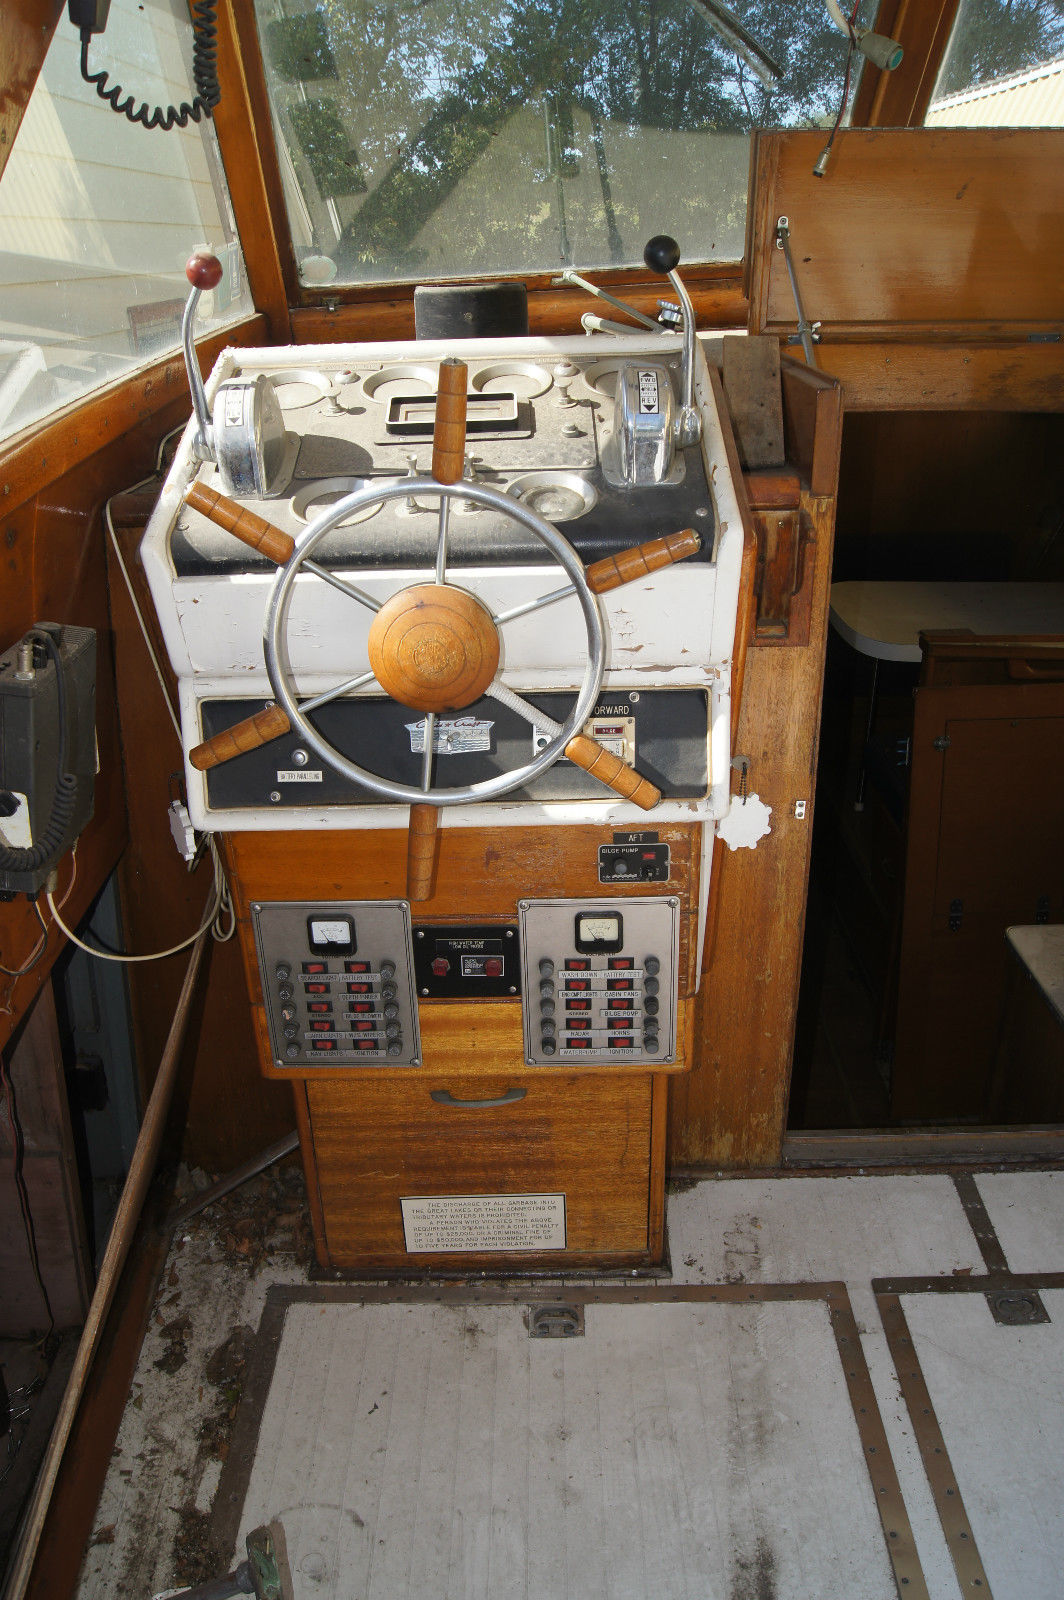 Chris Craft Constellation 1962 for sale for $1,500 - Boats 